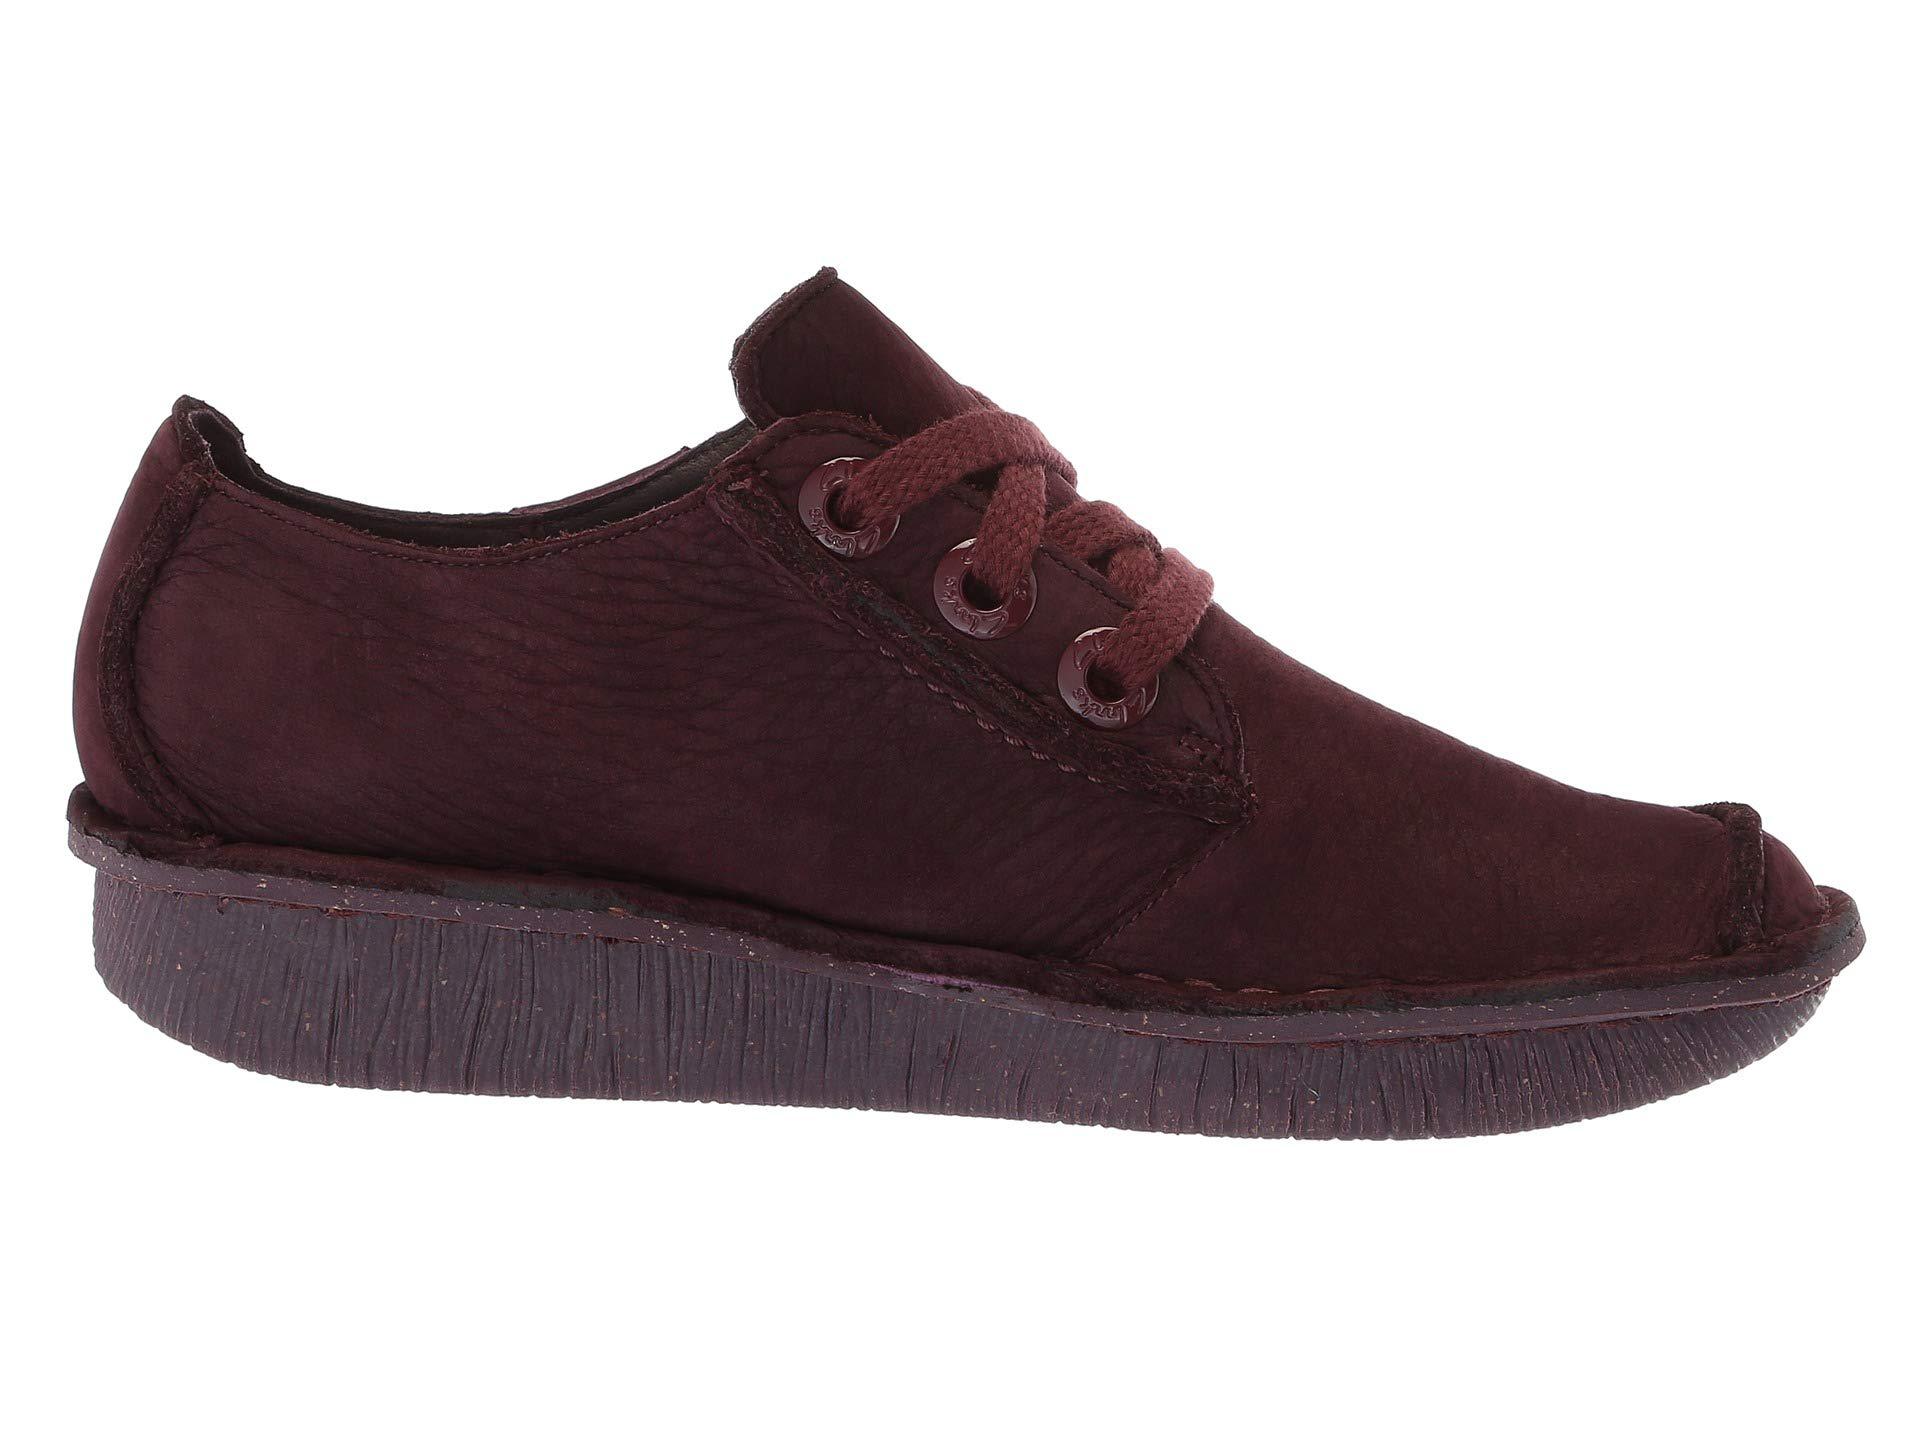 clarks funny dream shoes aubergine